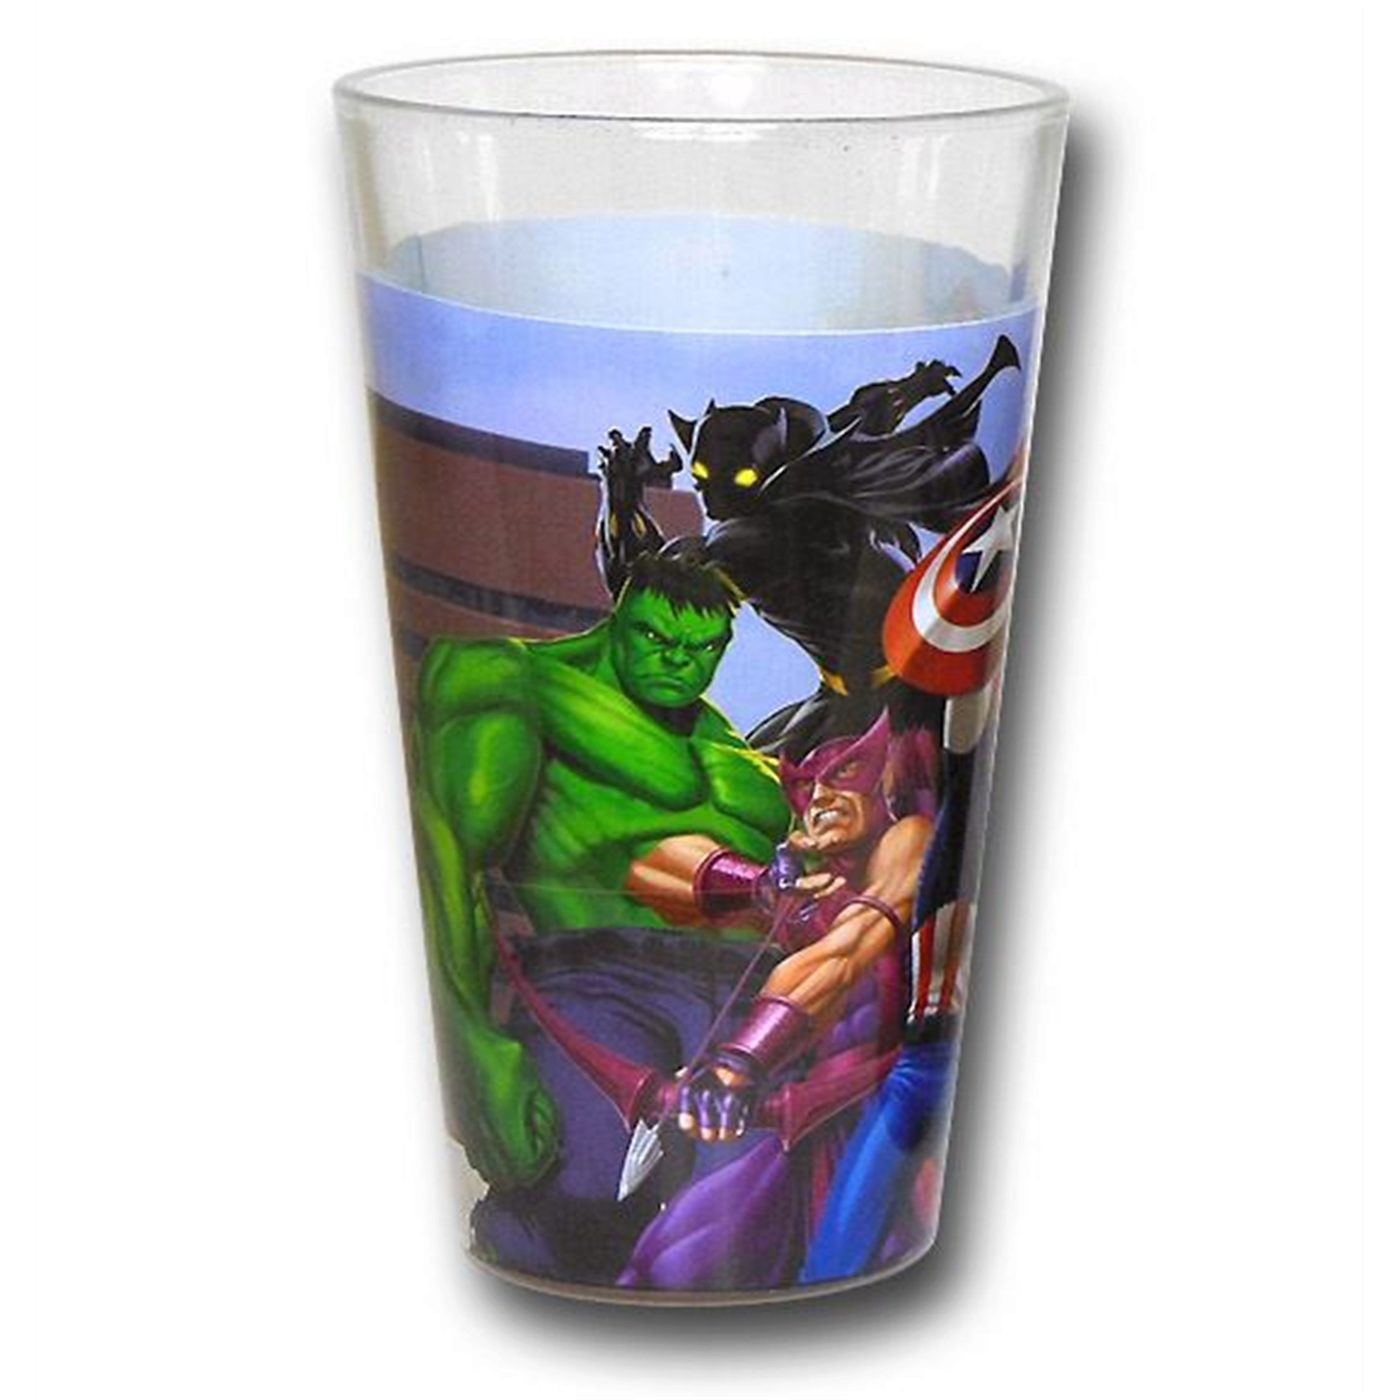 Marvel Group Wrap Pint Glass 2-Pack